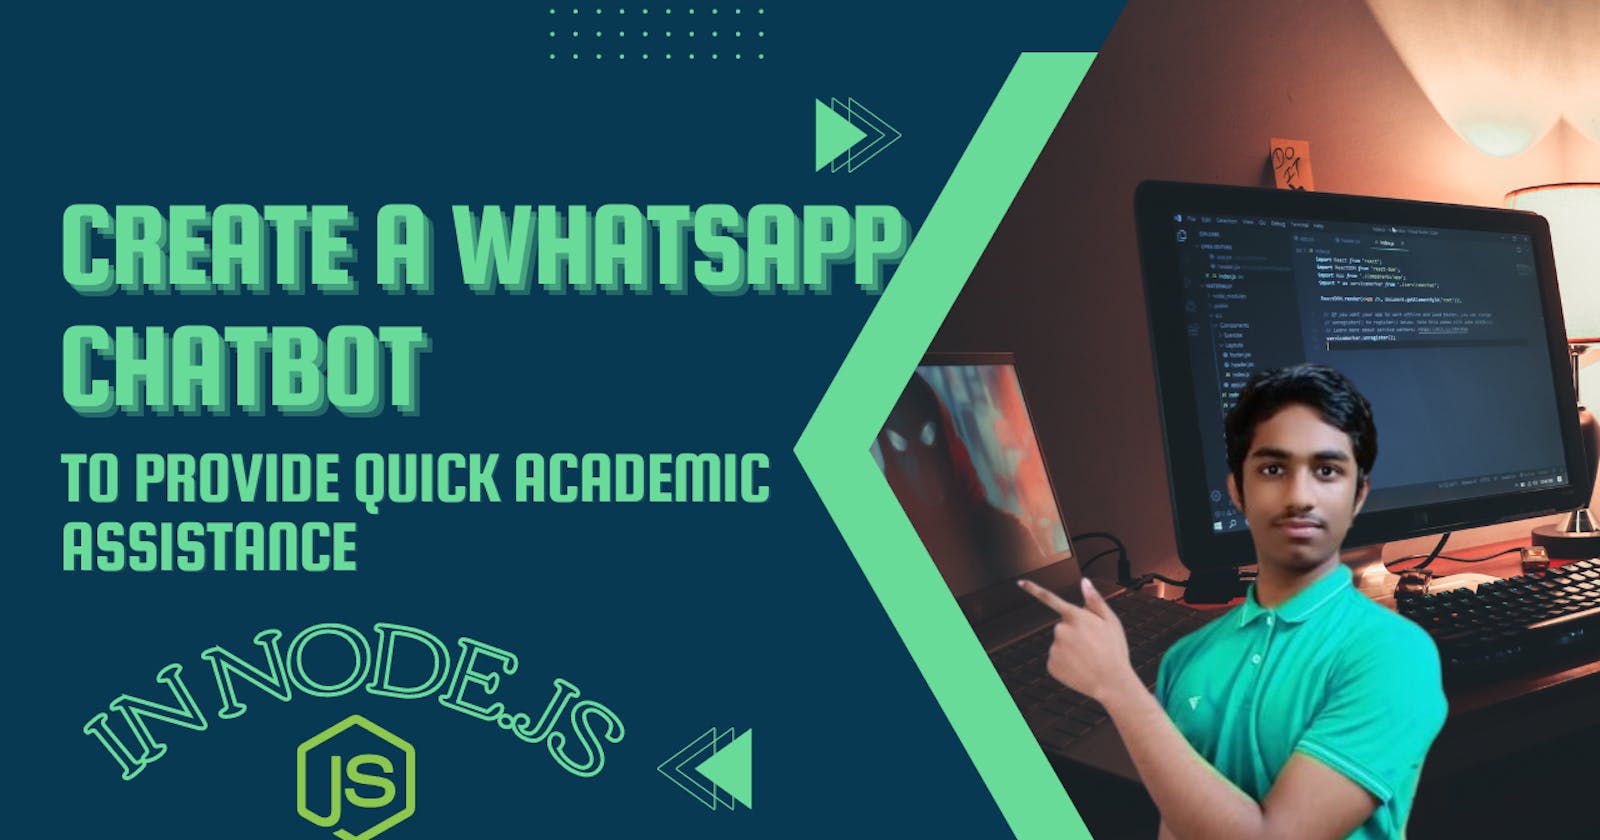 How to Create a WhatsApp Chatbot in Node.js to Provide Quick Academic Assistance